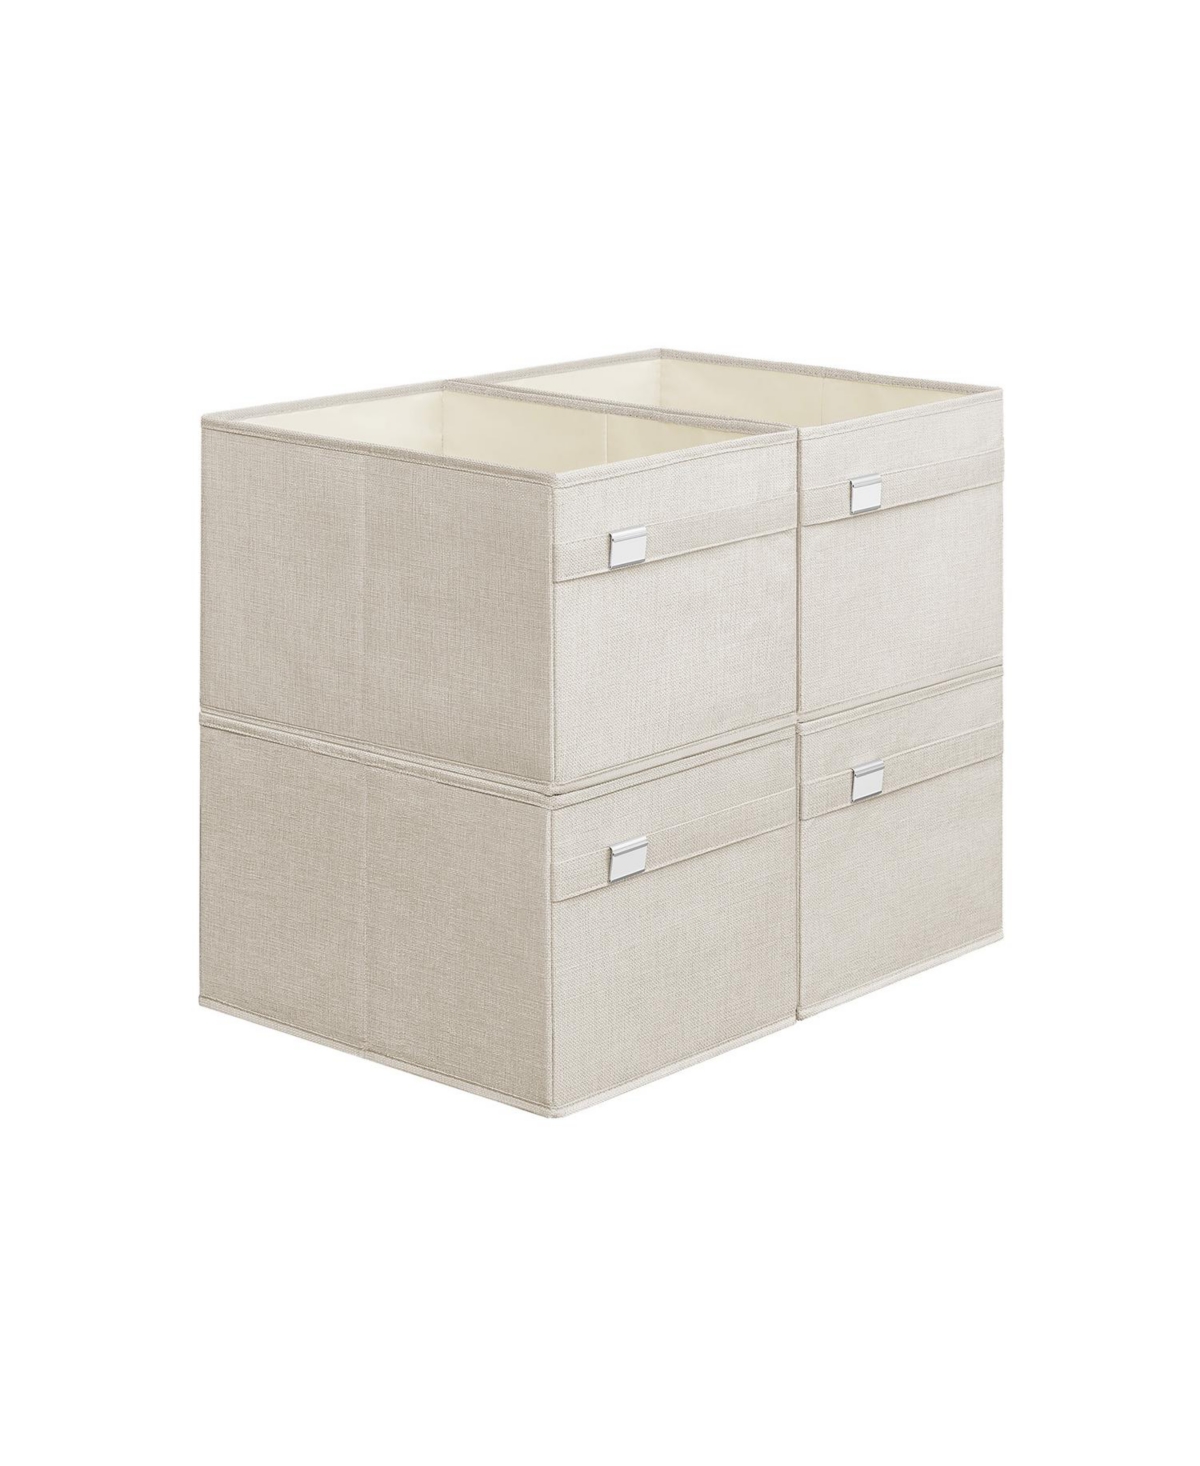 Storage Baskets, Storage Bins, 2 Handles, Oxford Fabric and Linen-Look Fabric, Washable, Foldable, Metal Label Holders - Beige